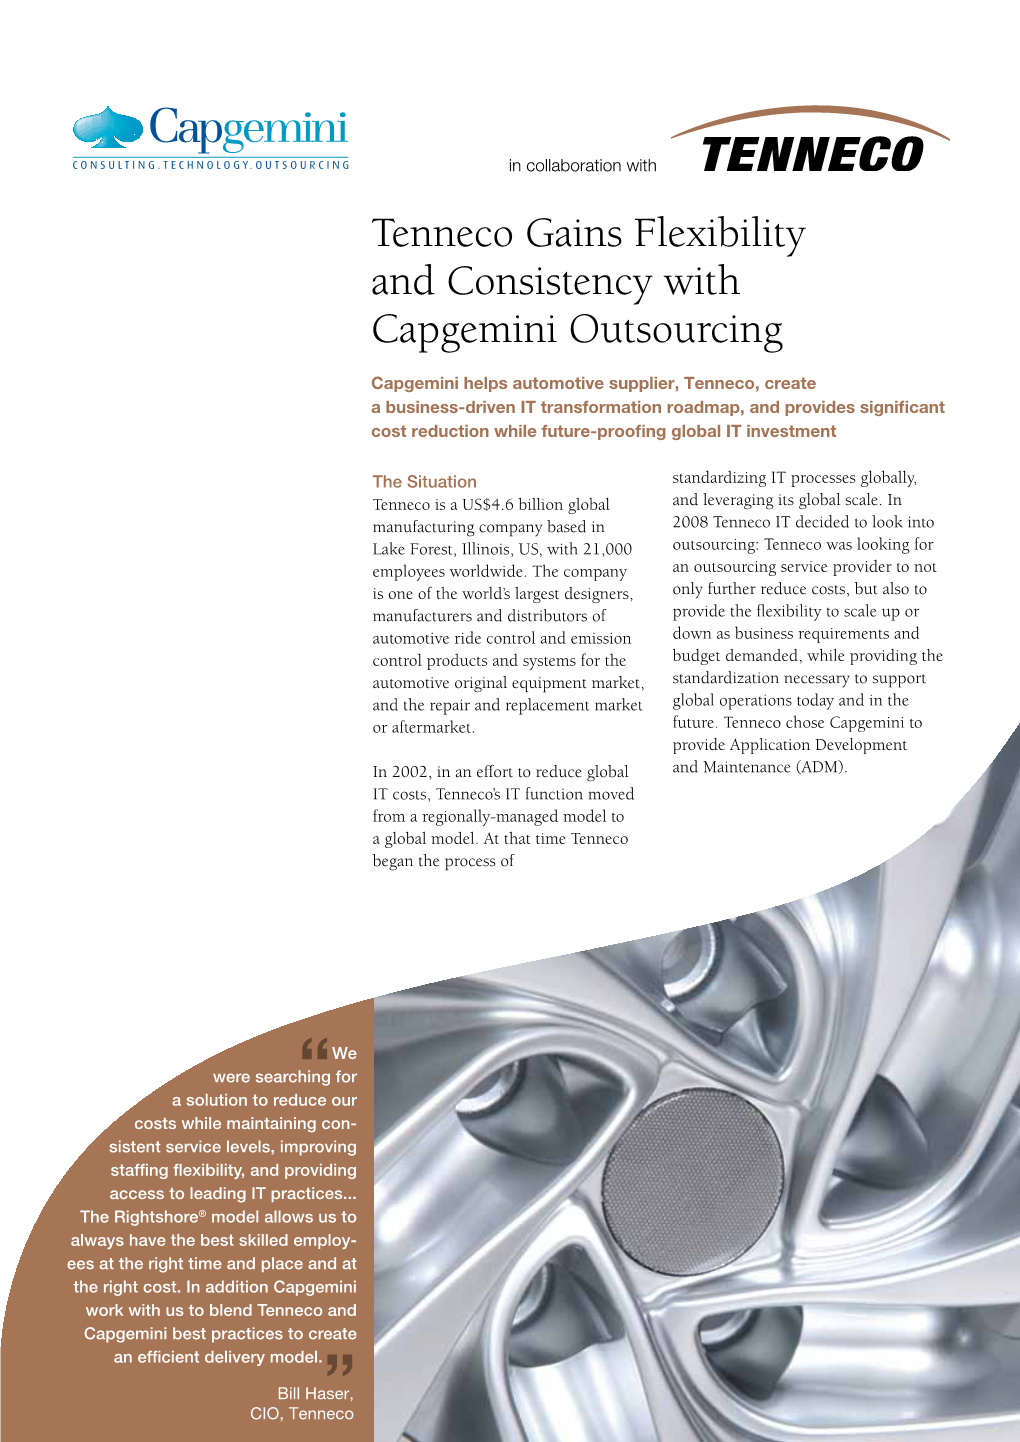 Tenneco Gains Flexibility and Consistency with Capgemini Outsourcing